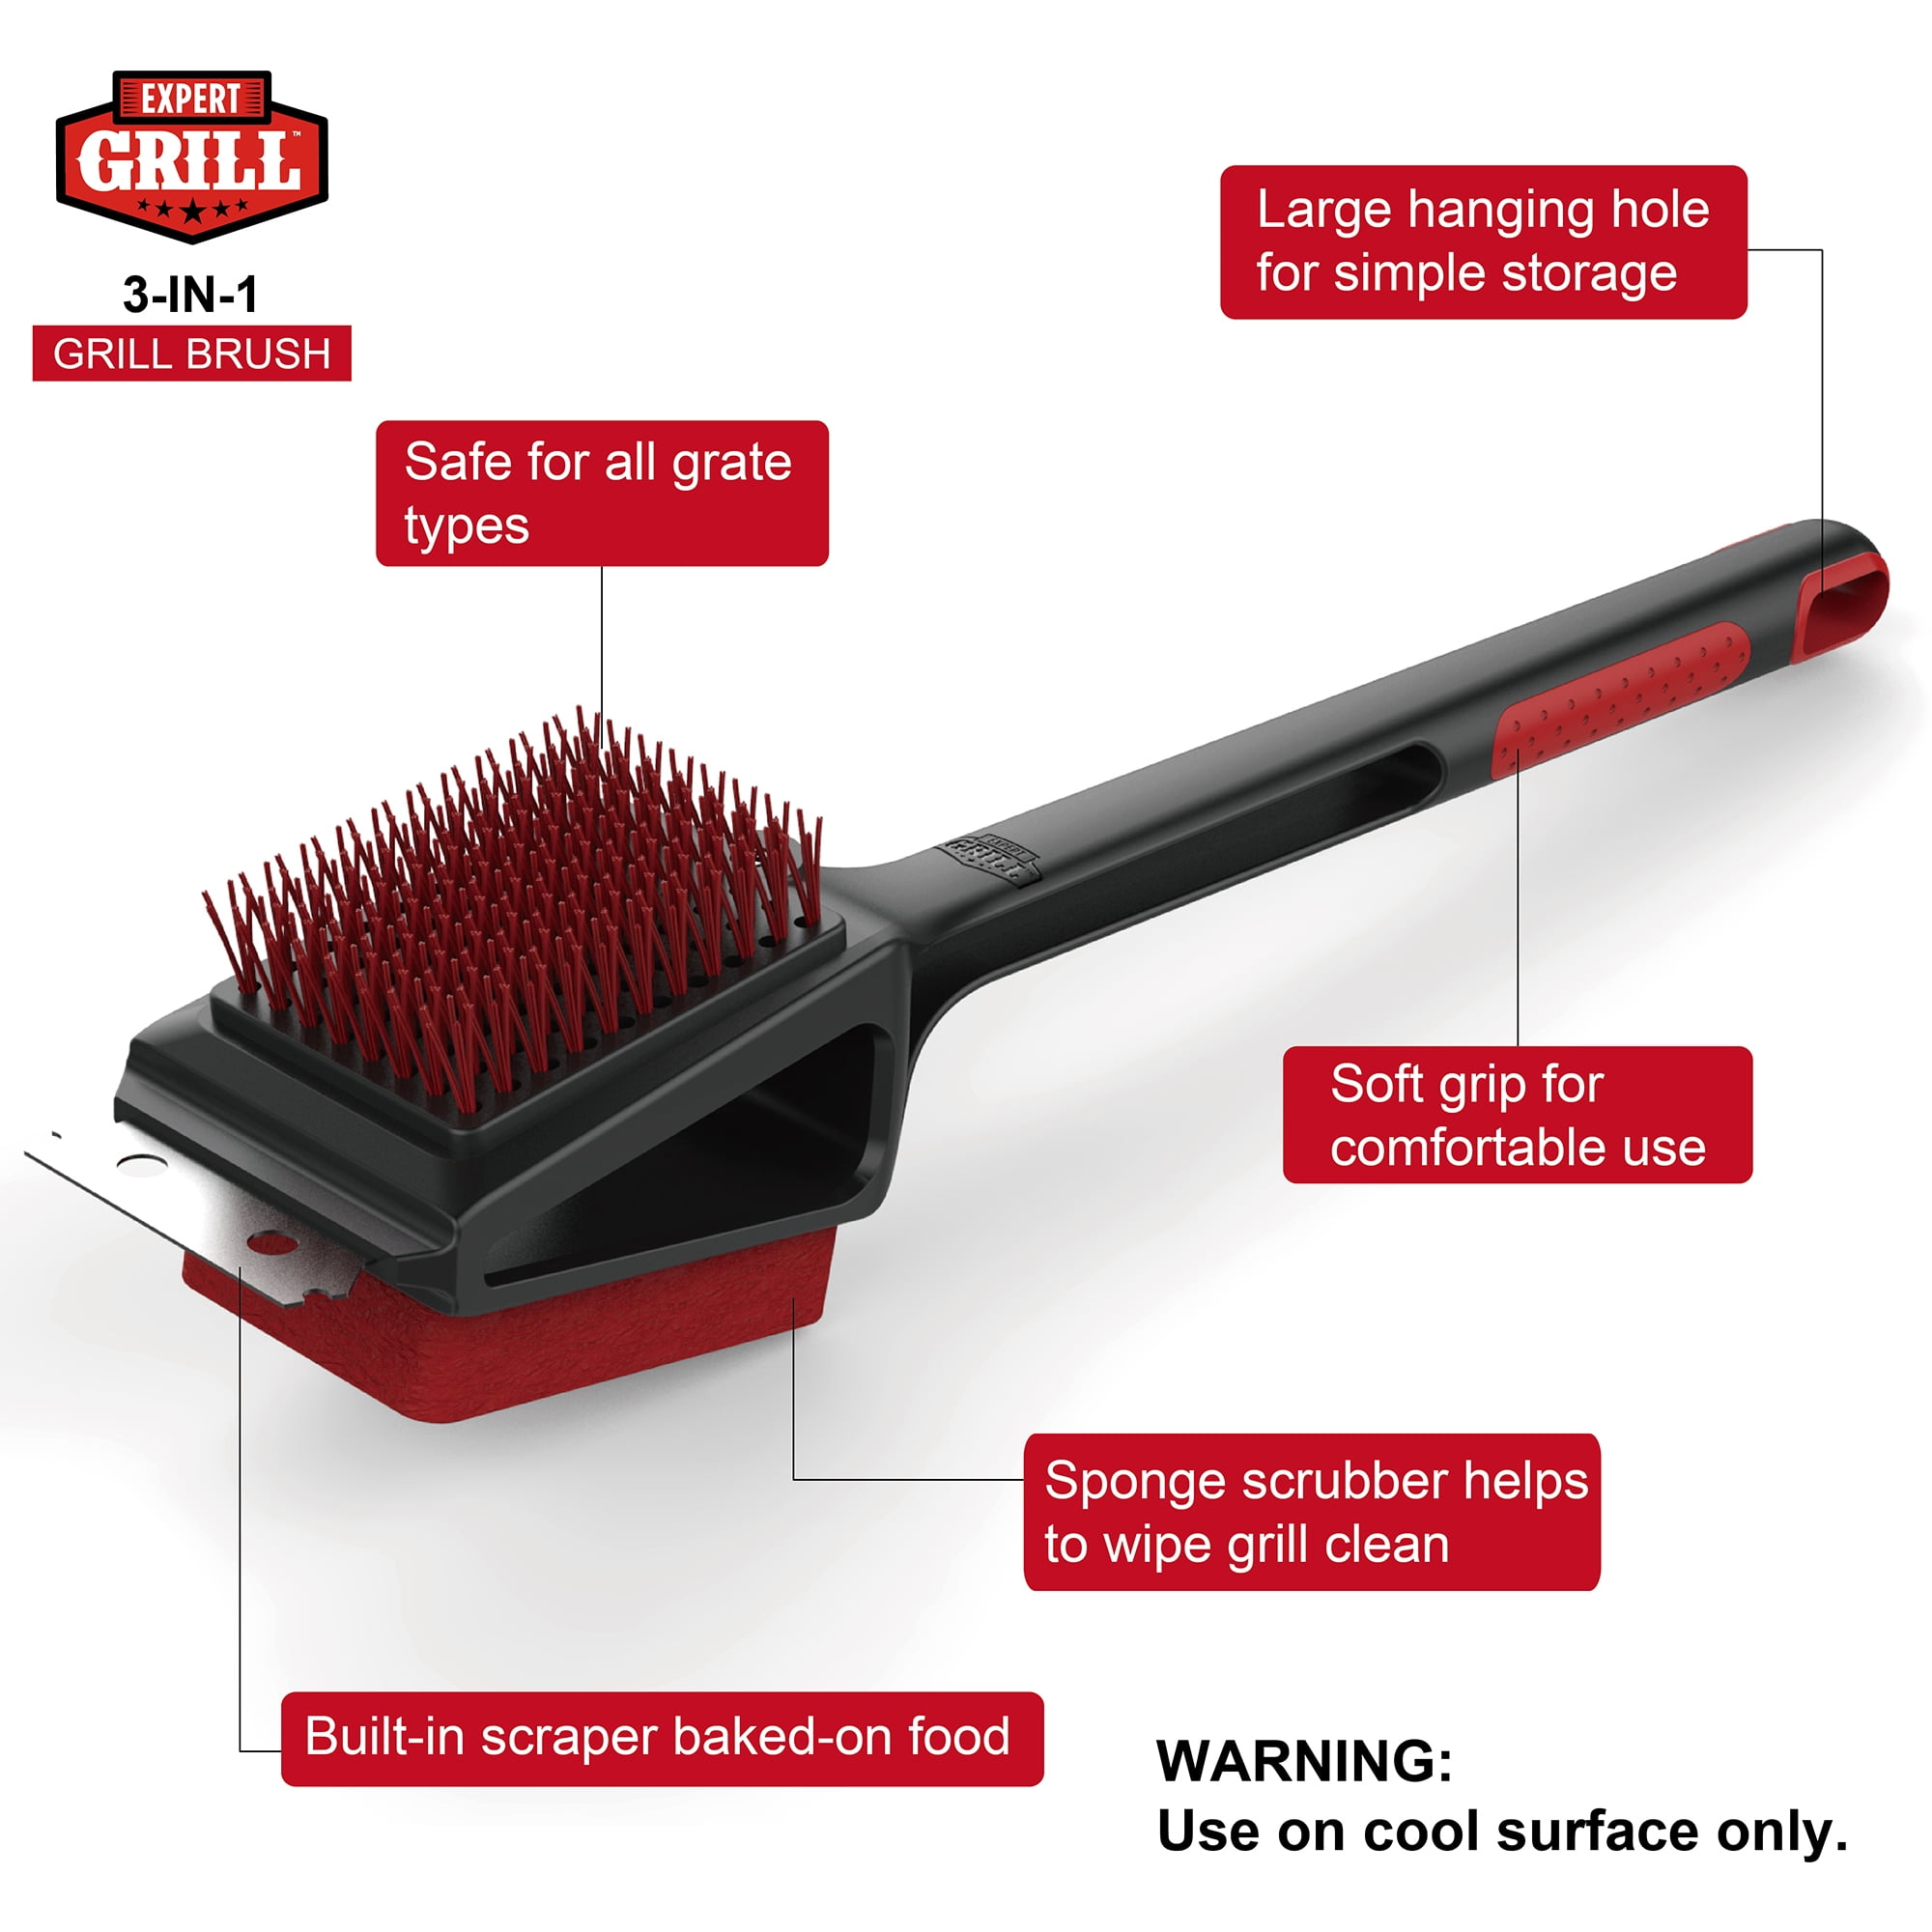 Expert Grill Grill Brush Soft Grip 3-in-1 Barbecue Cleaning Brush 